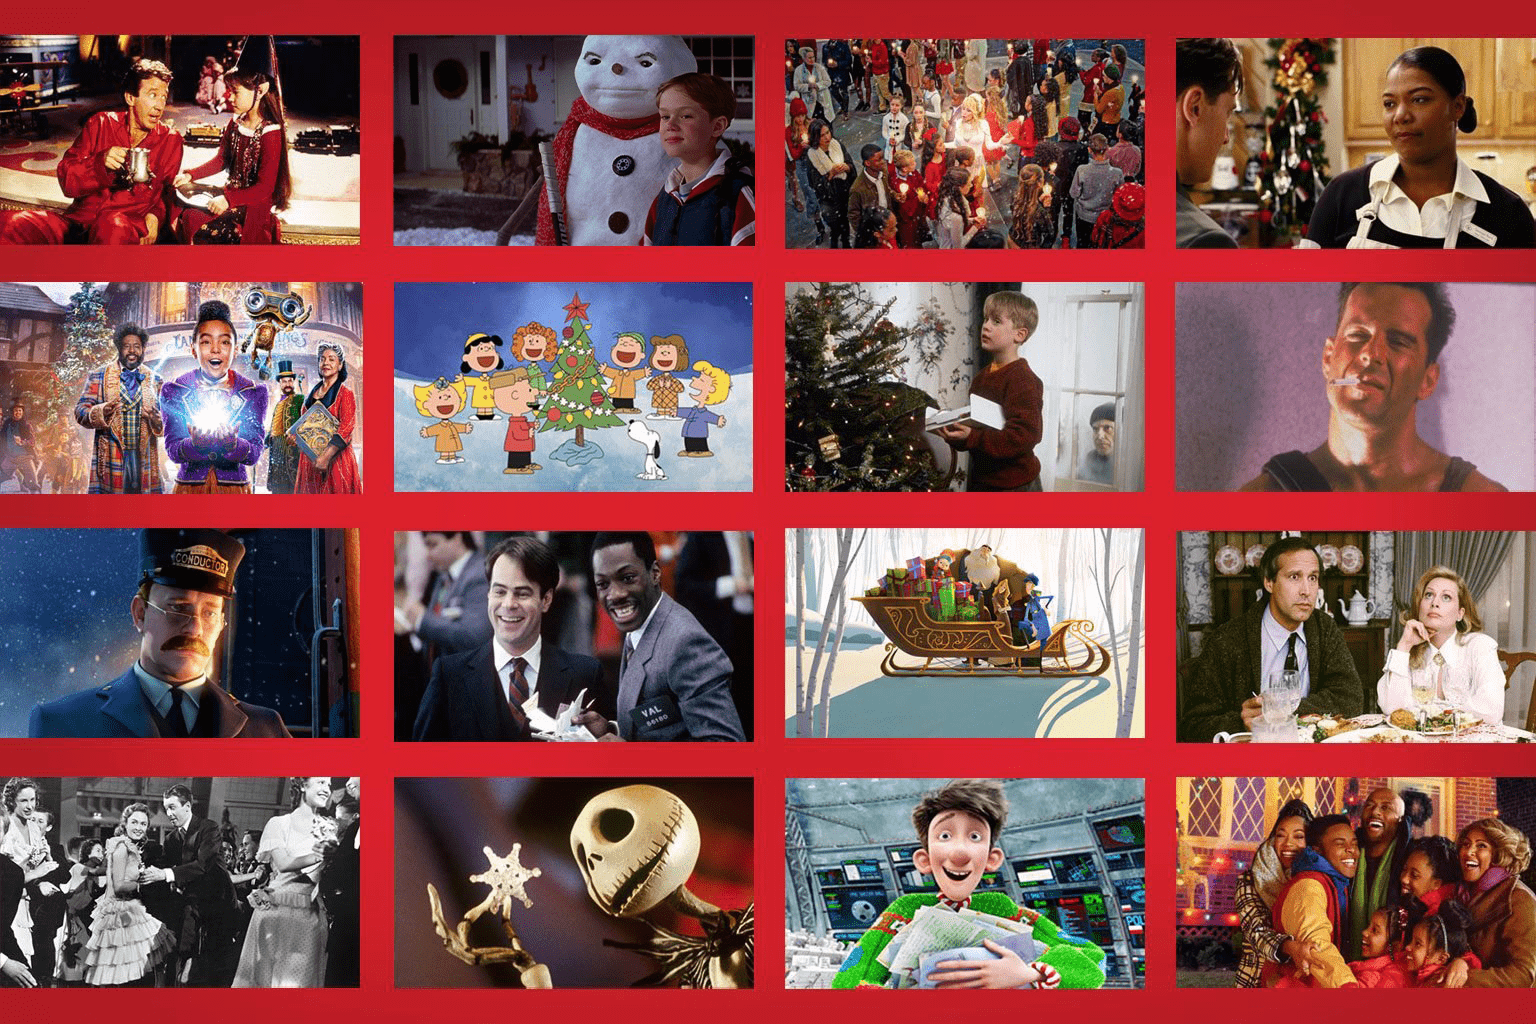 50 Best Christmas Movies For Kids & Teens (G, PG, PG-13 Rating)